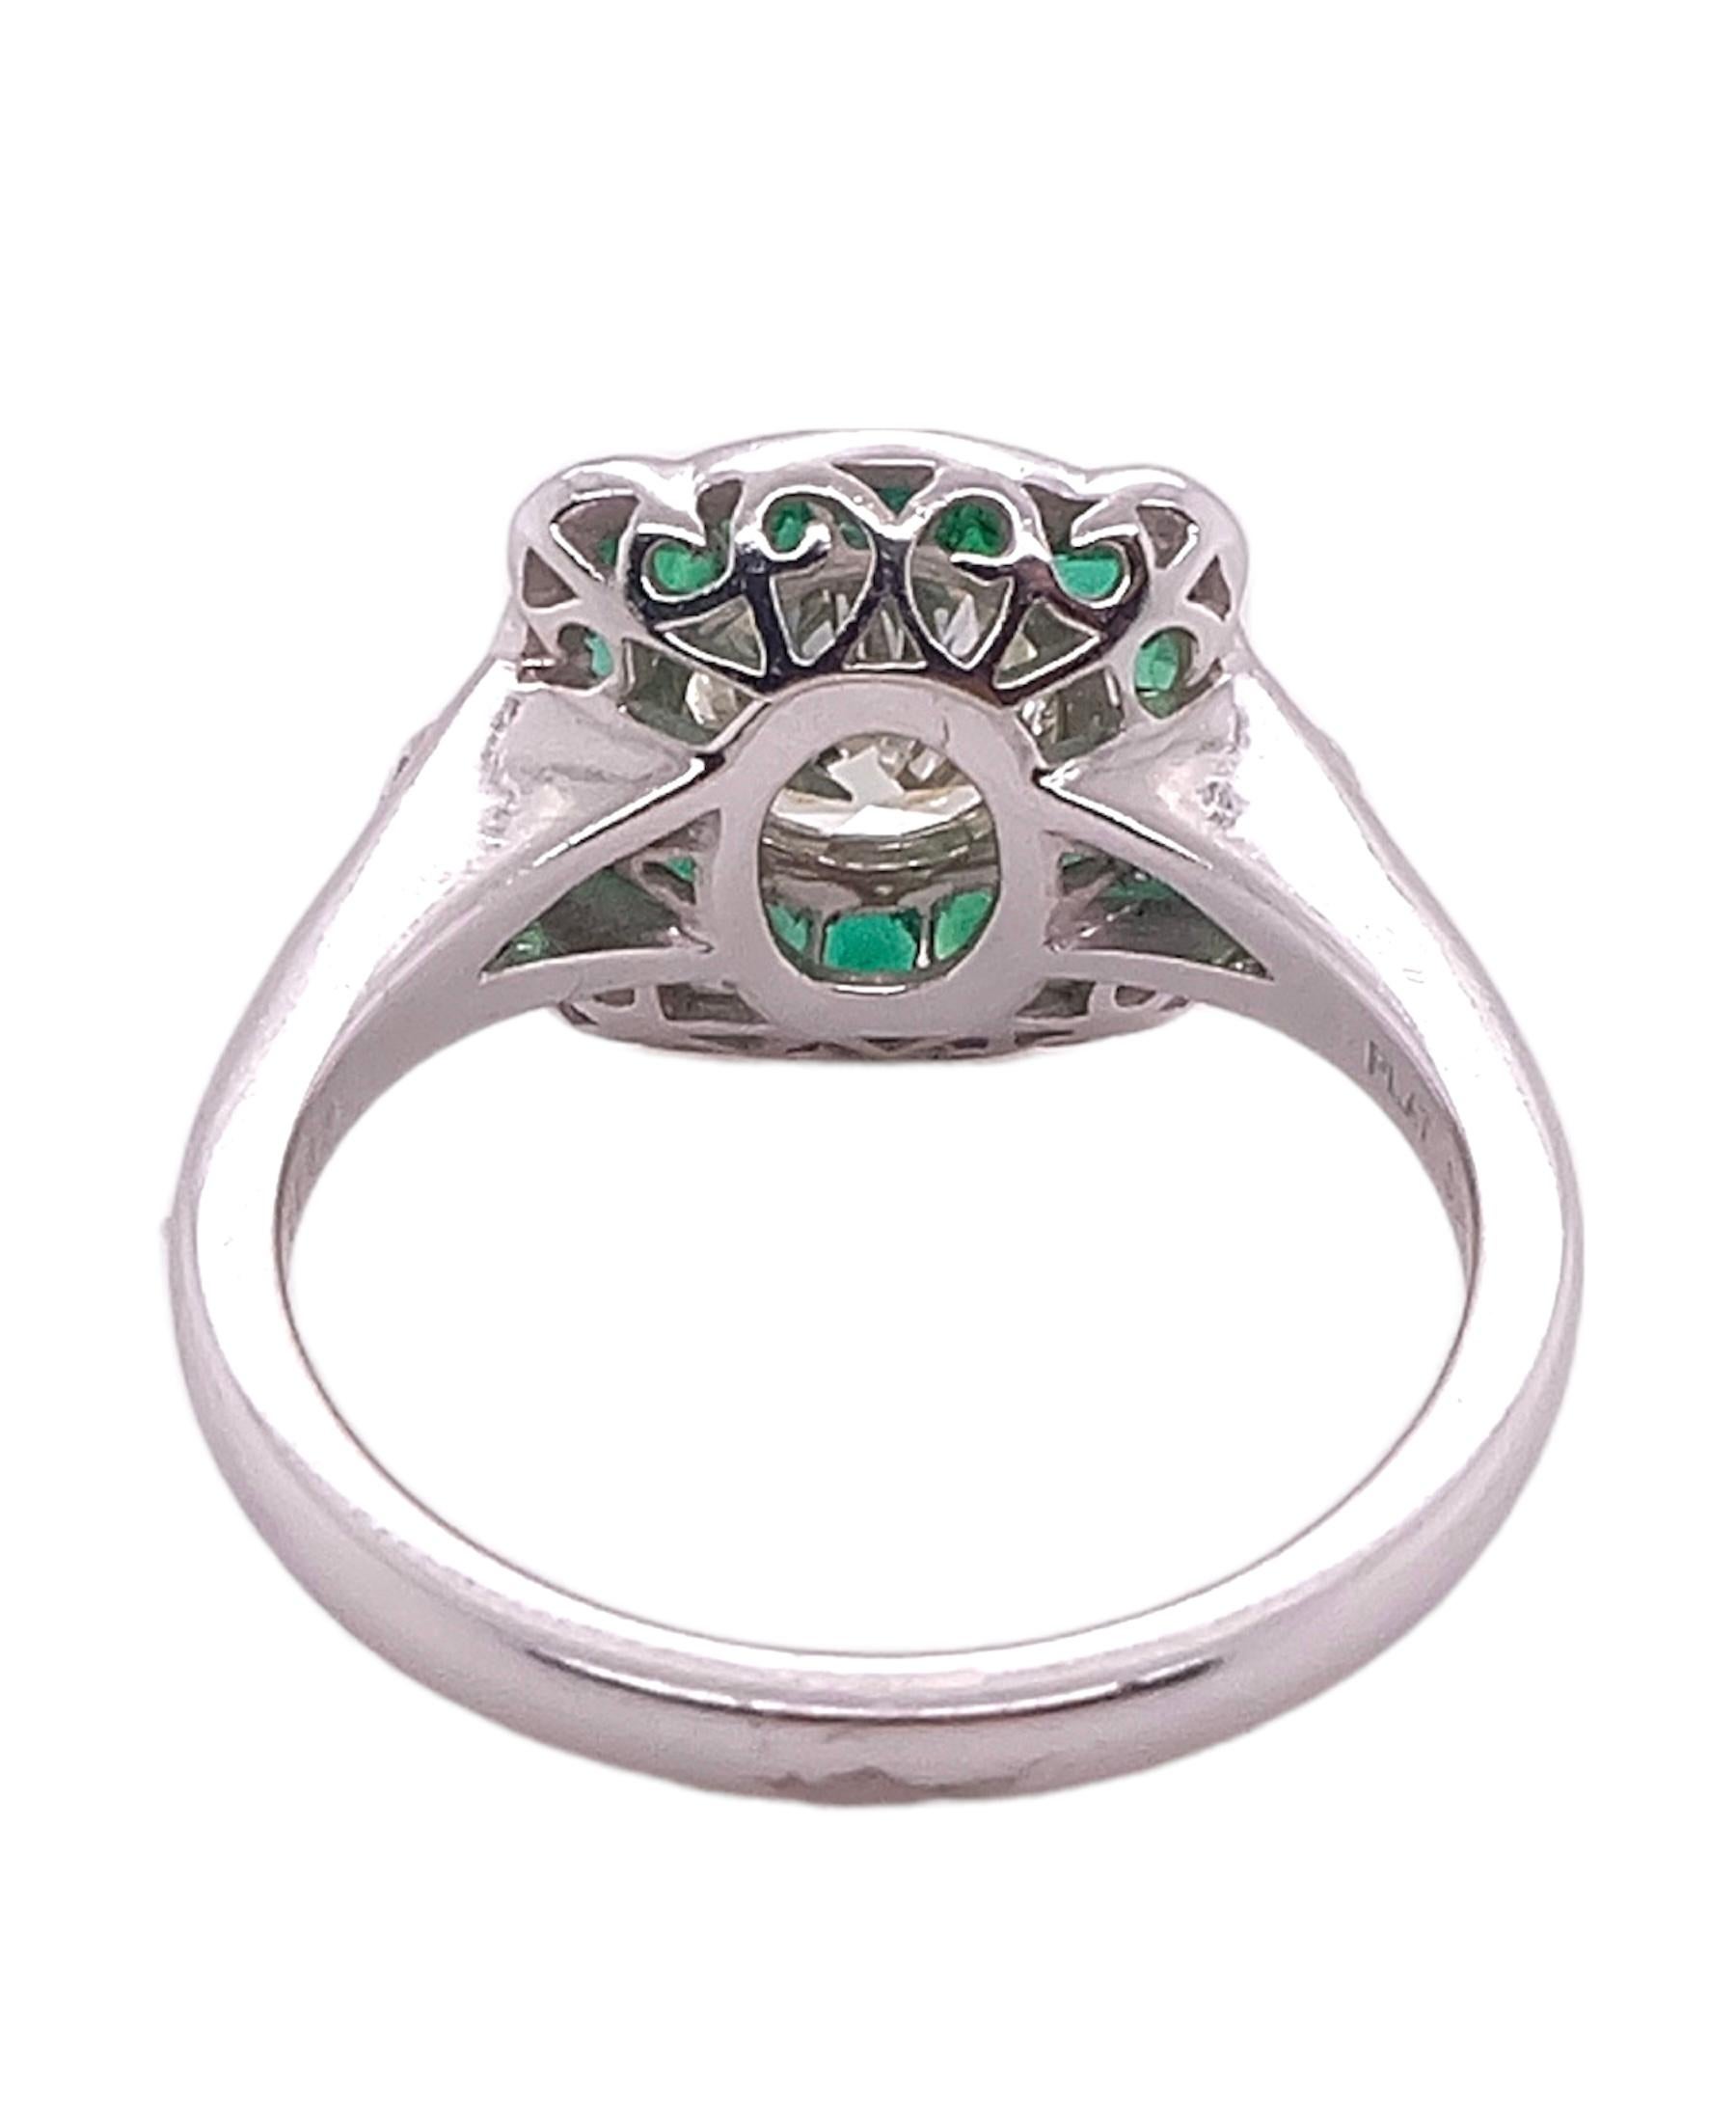 Created and designed by Sophia D, this ring is with 1.02 Carat round center stone surrounded with .72 carats emeralds and 0.03 small diamonds set in platinum.

Ring is available for resizing.

Sophia D by Joseph Dardashti LTD has been known